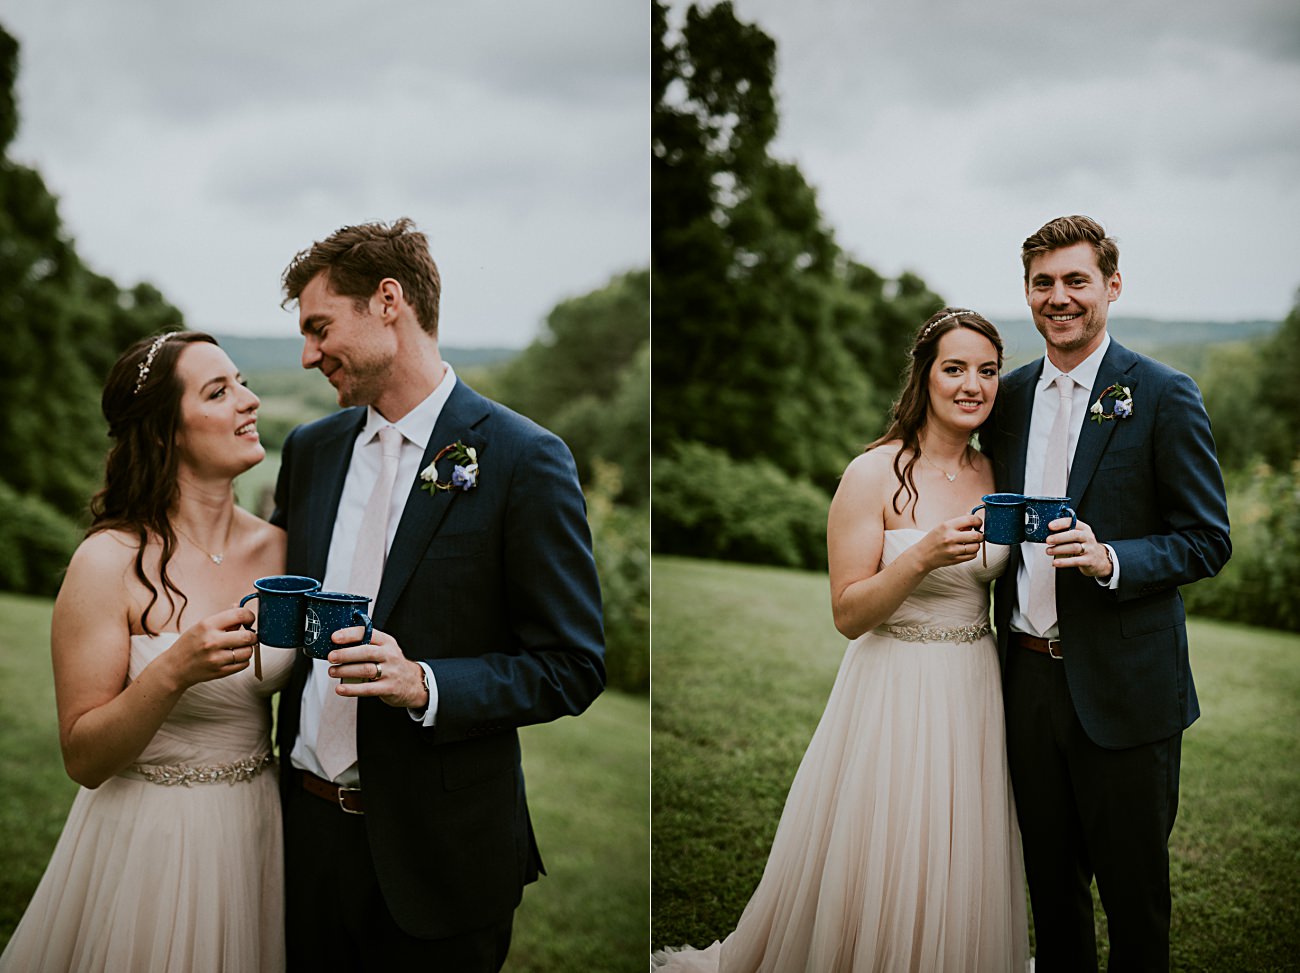 Navy Groom Suit, Bride and Groom Photos, Couples photos on wedding days, Stormy sky's, Blush wedding gown, Backyard Hilltop Wedding in Spring Green Wisconsin, Madison WI Wedding Photographer